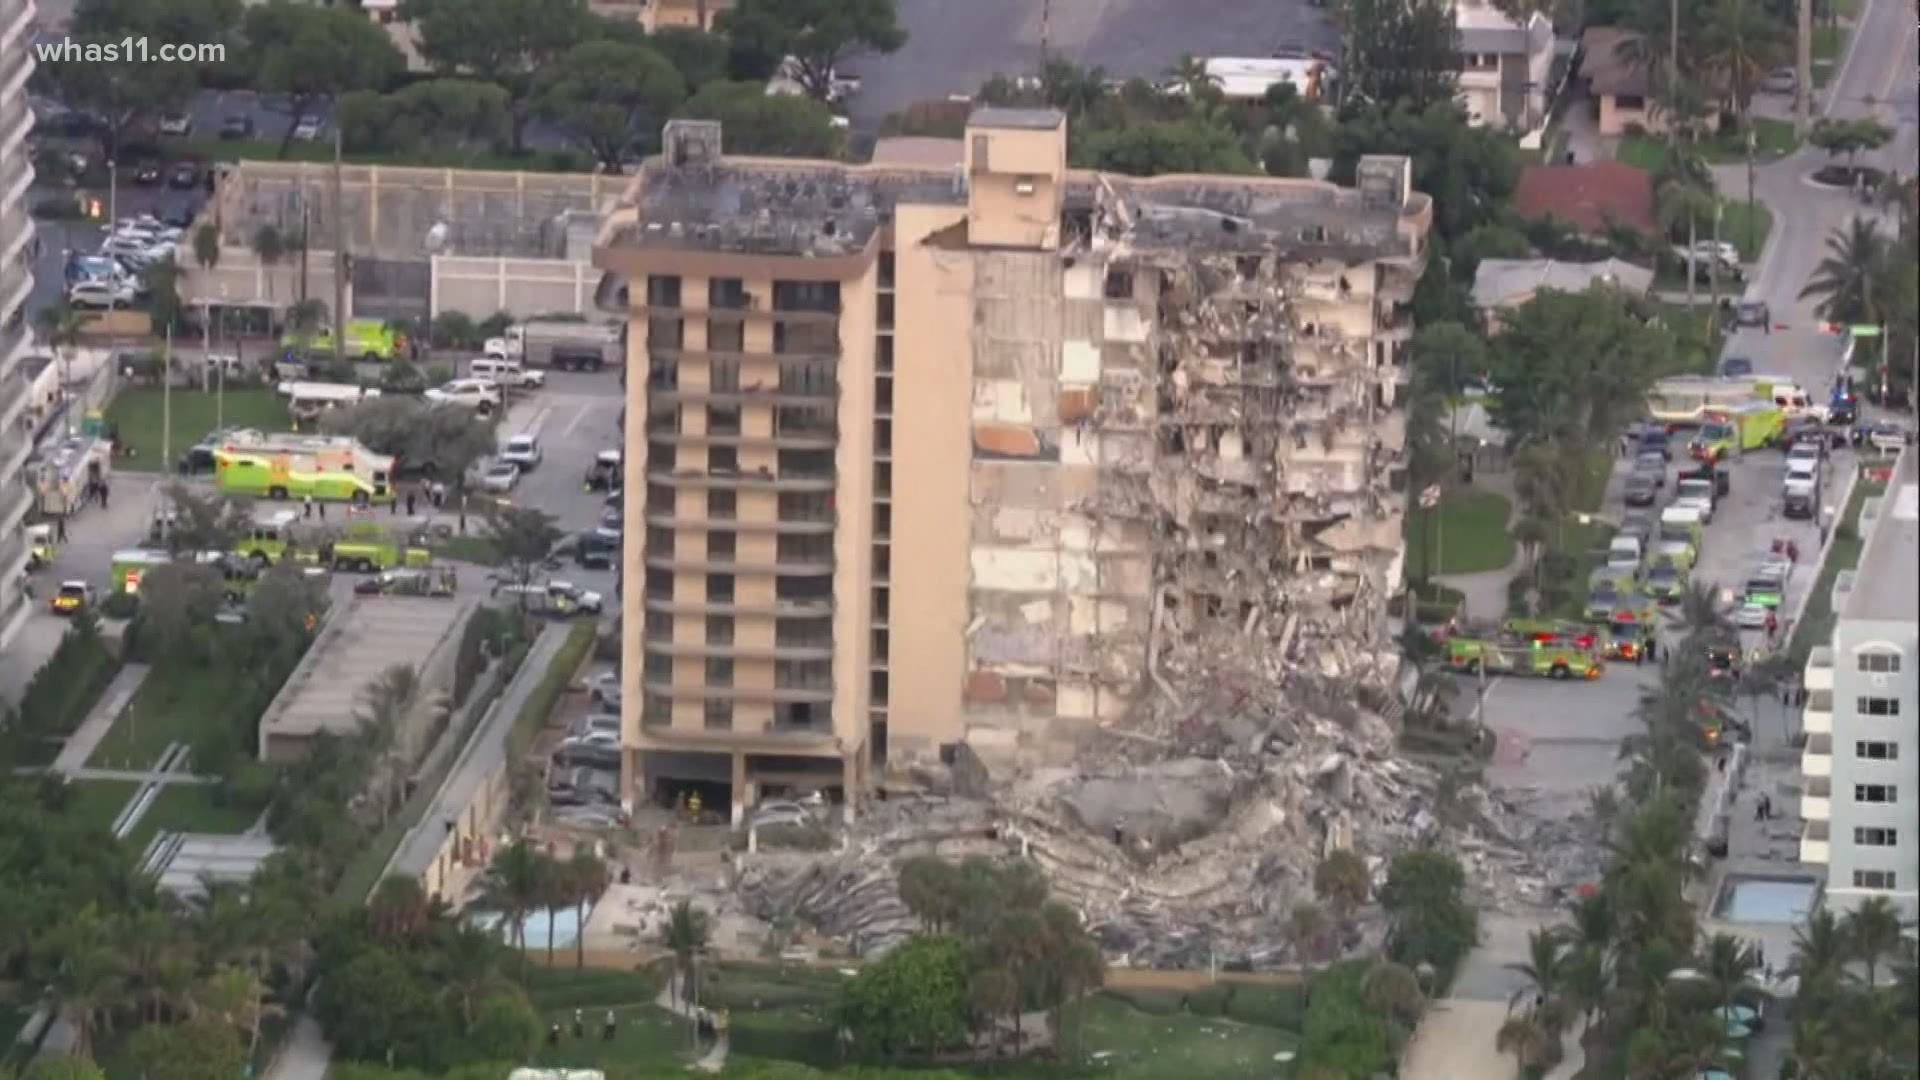 A high-rise building partially collapsed early Thursday morning in Surfside, Florida.